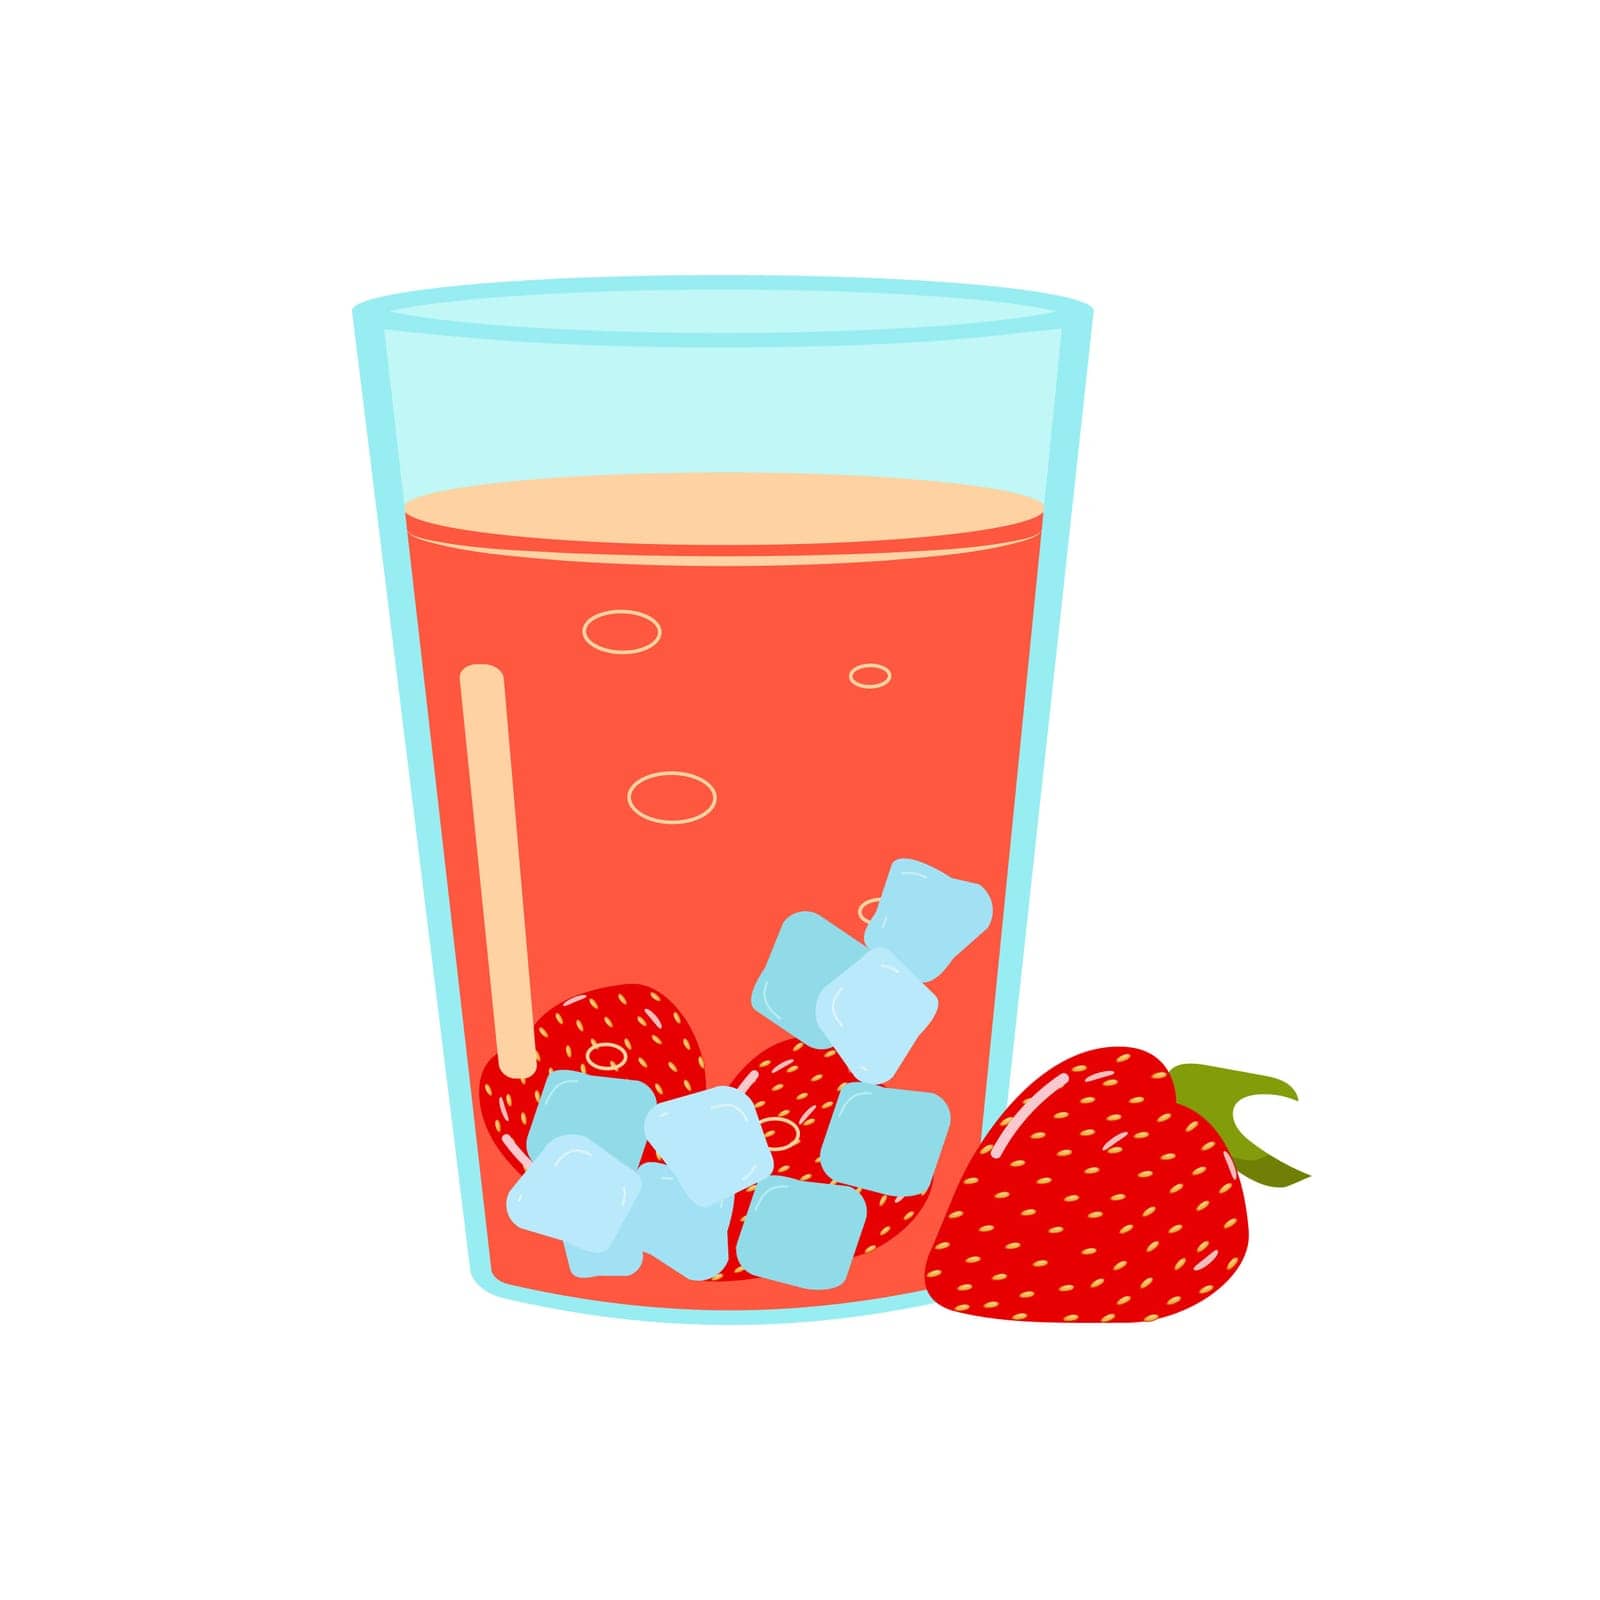 Summer soft fruit cold refreshment drinks glass. Strawberries with ice. Isolated vector illustration on a white background. For cafe menu design.